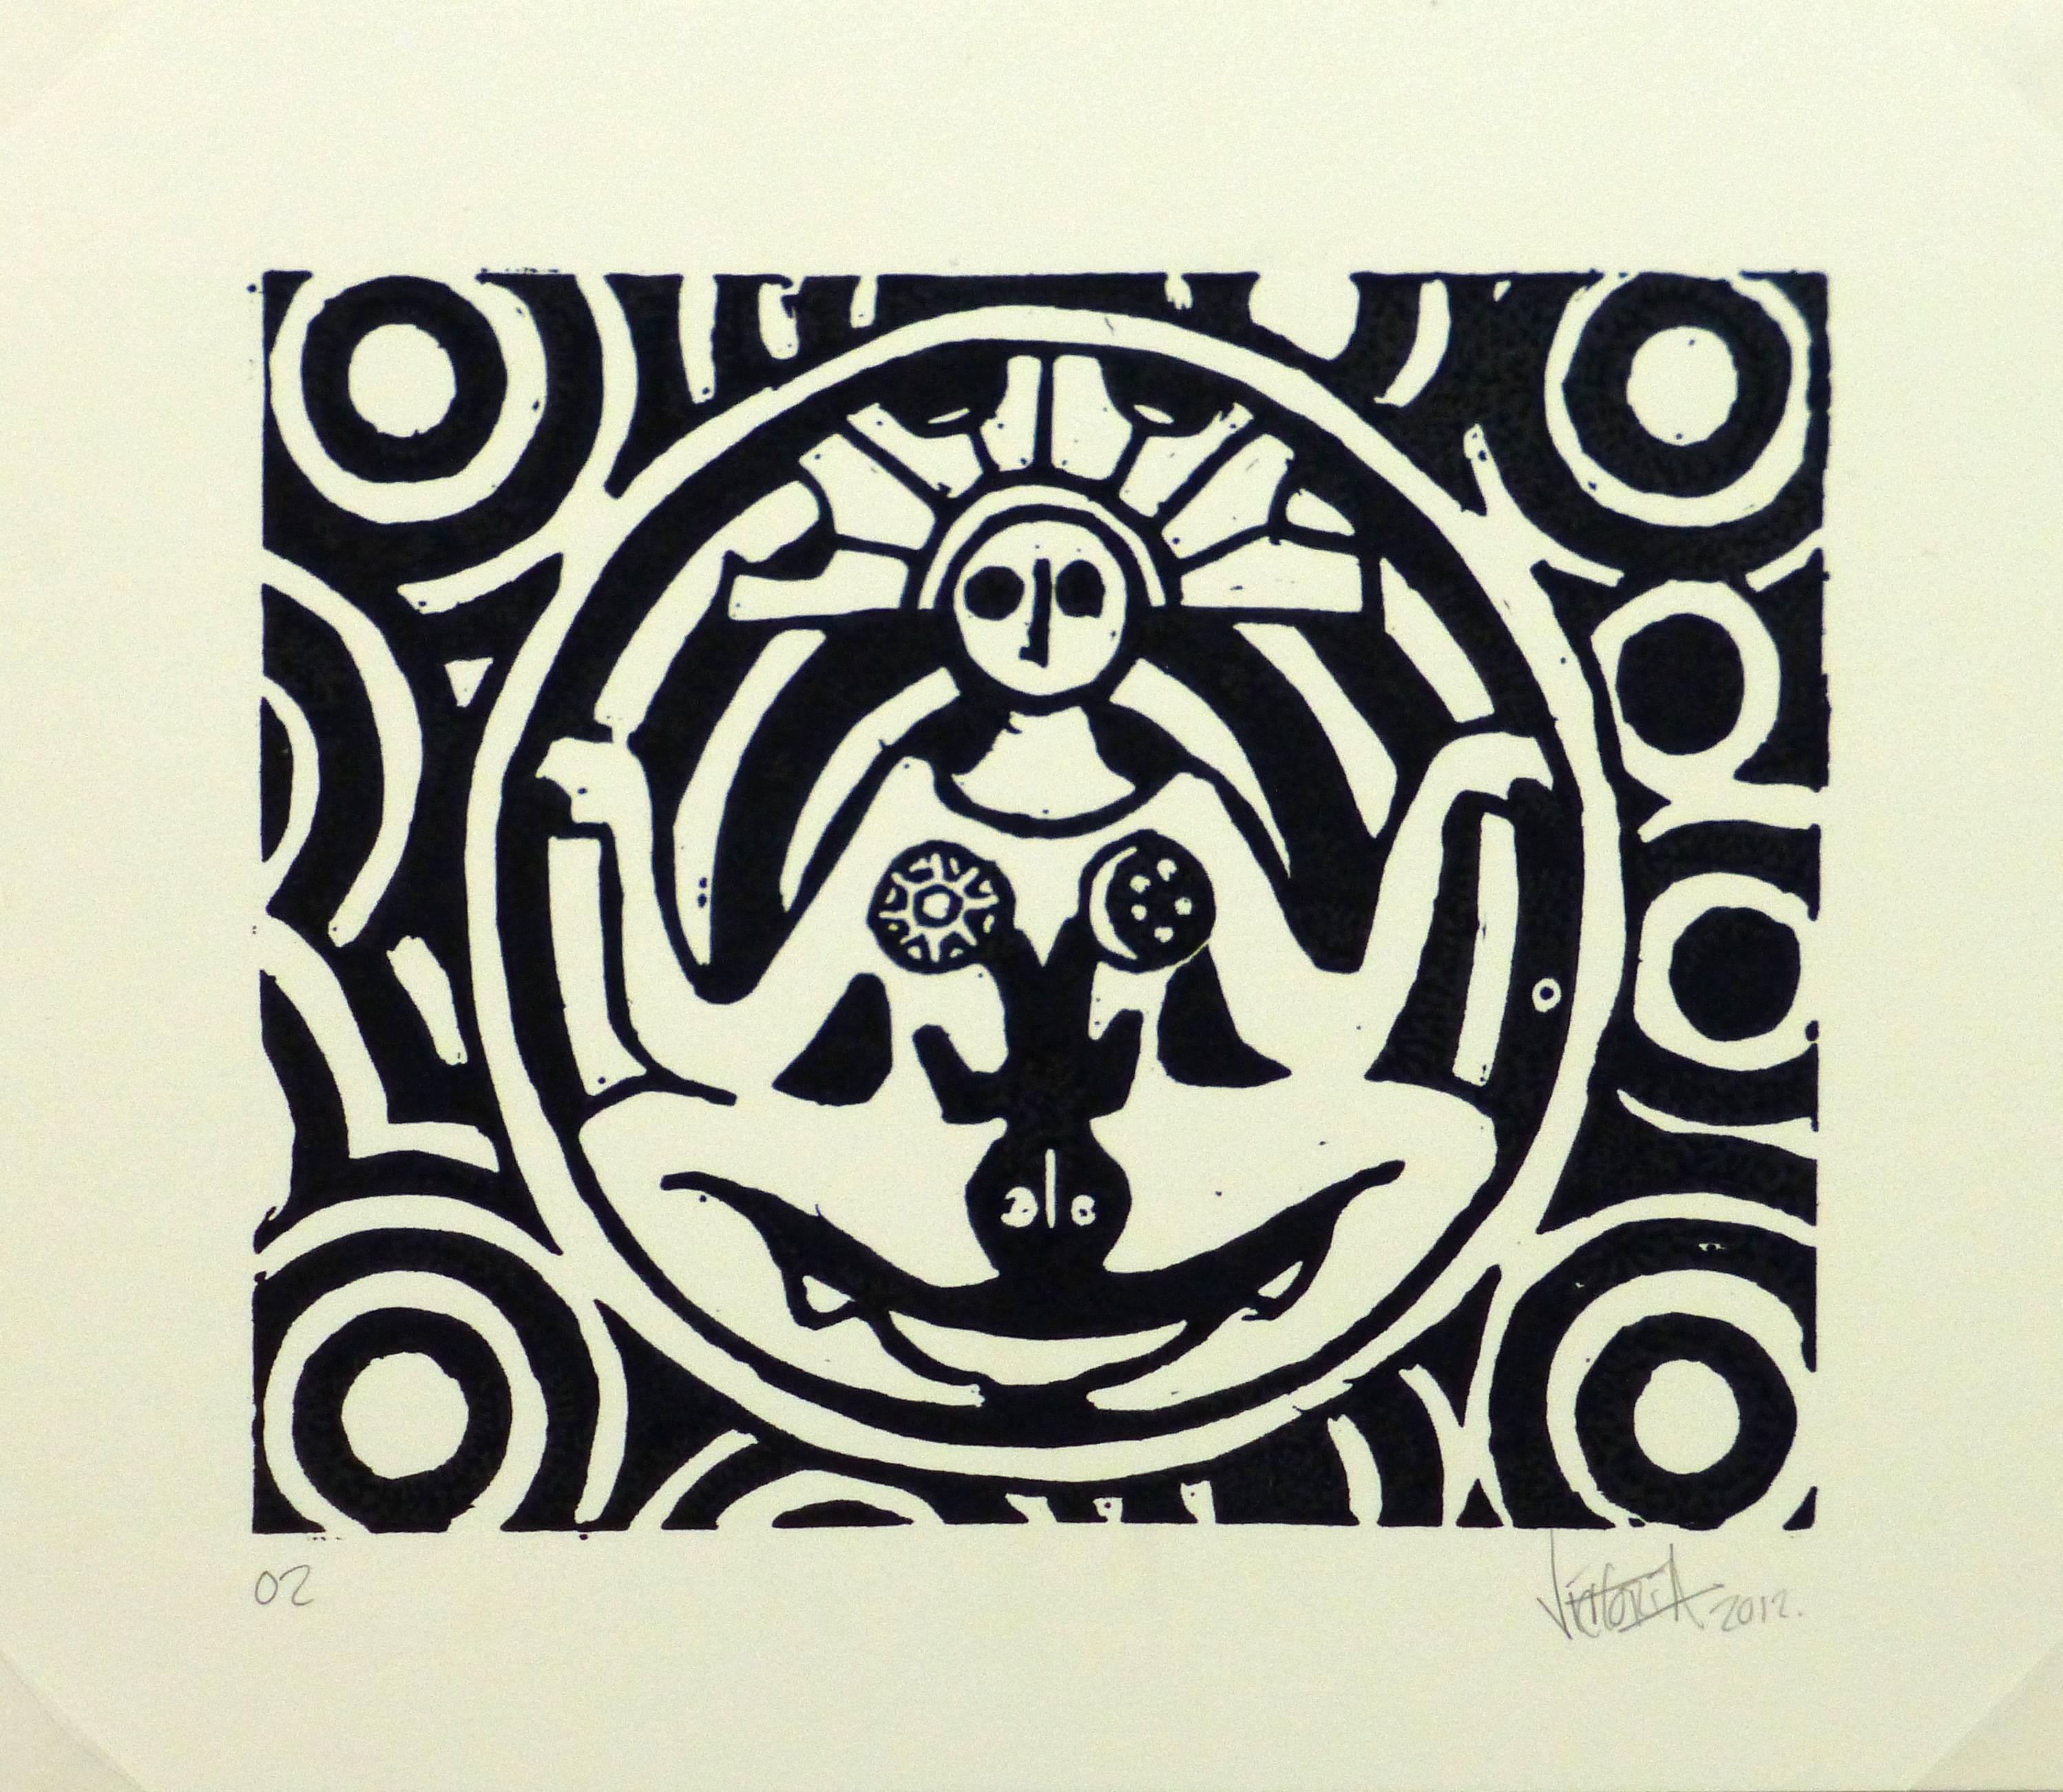 Irvin Victoria Abstract Print - Black and White Linocut - The Deity